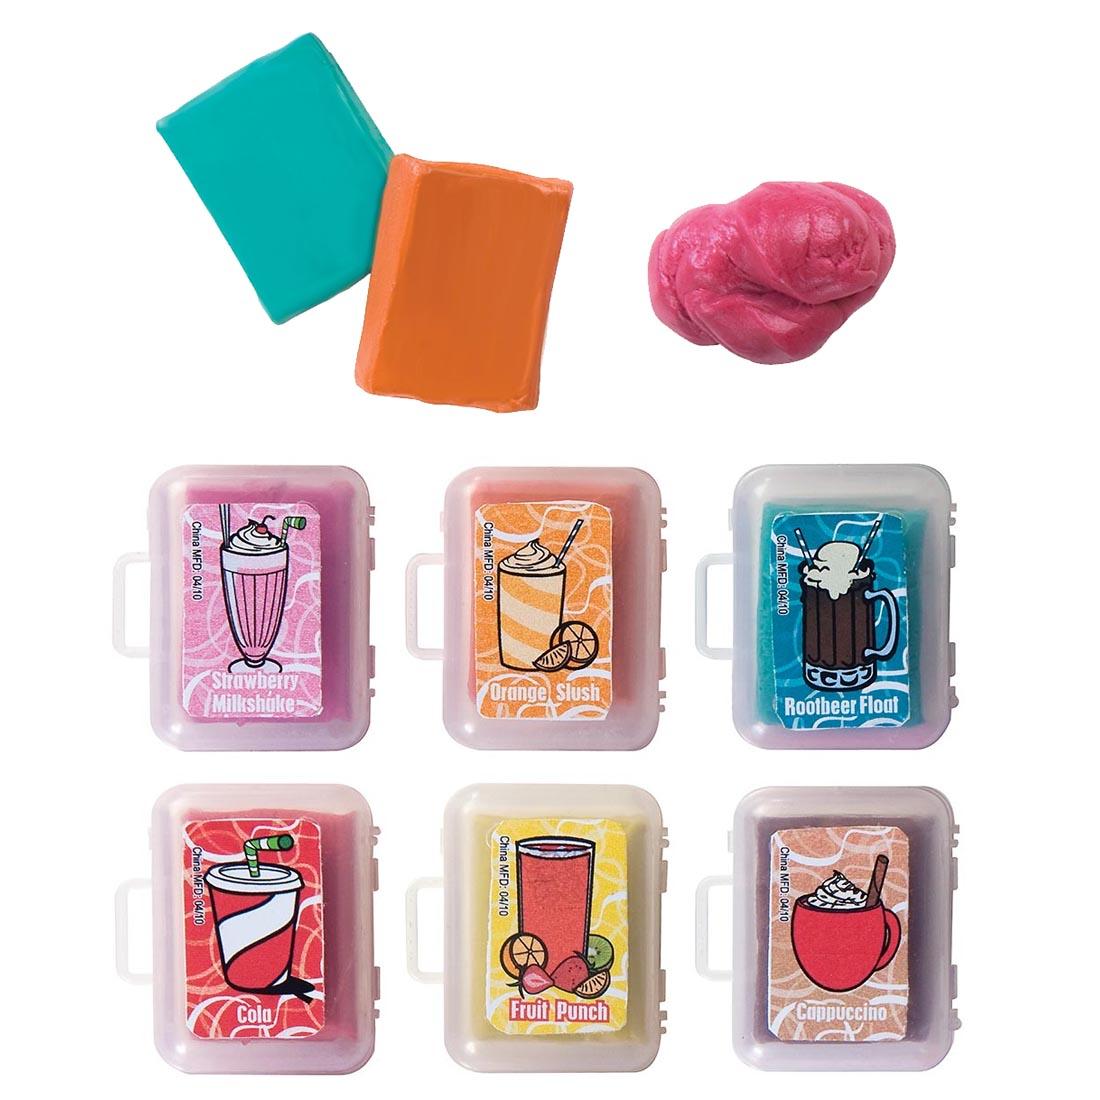 Snack Attack Scented Kneaded Erasers include strawberry milkshake, orange slush, rootbeer float, cola, fruit punch and cappuccino